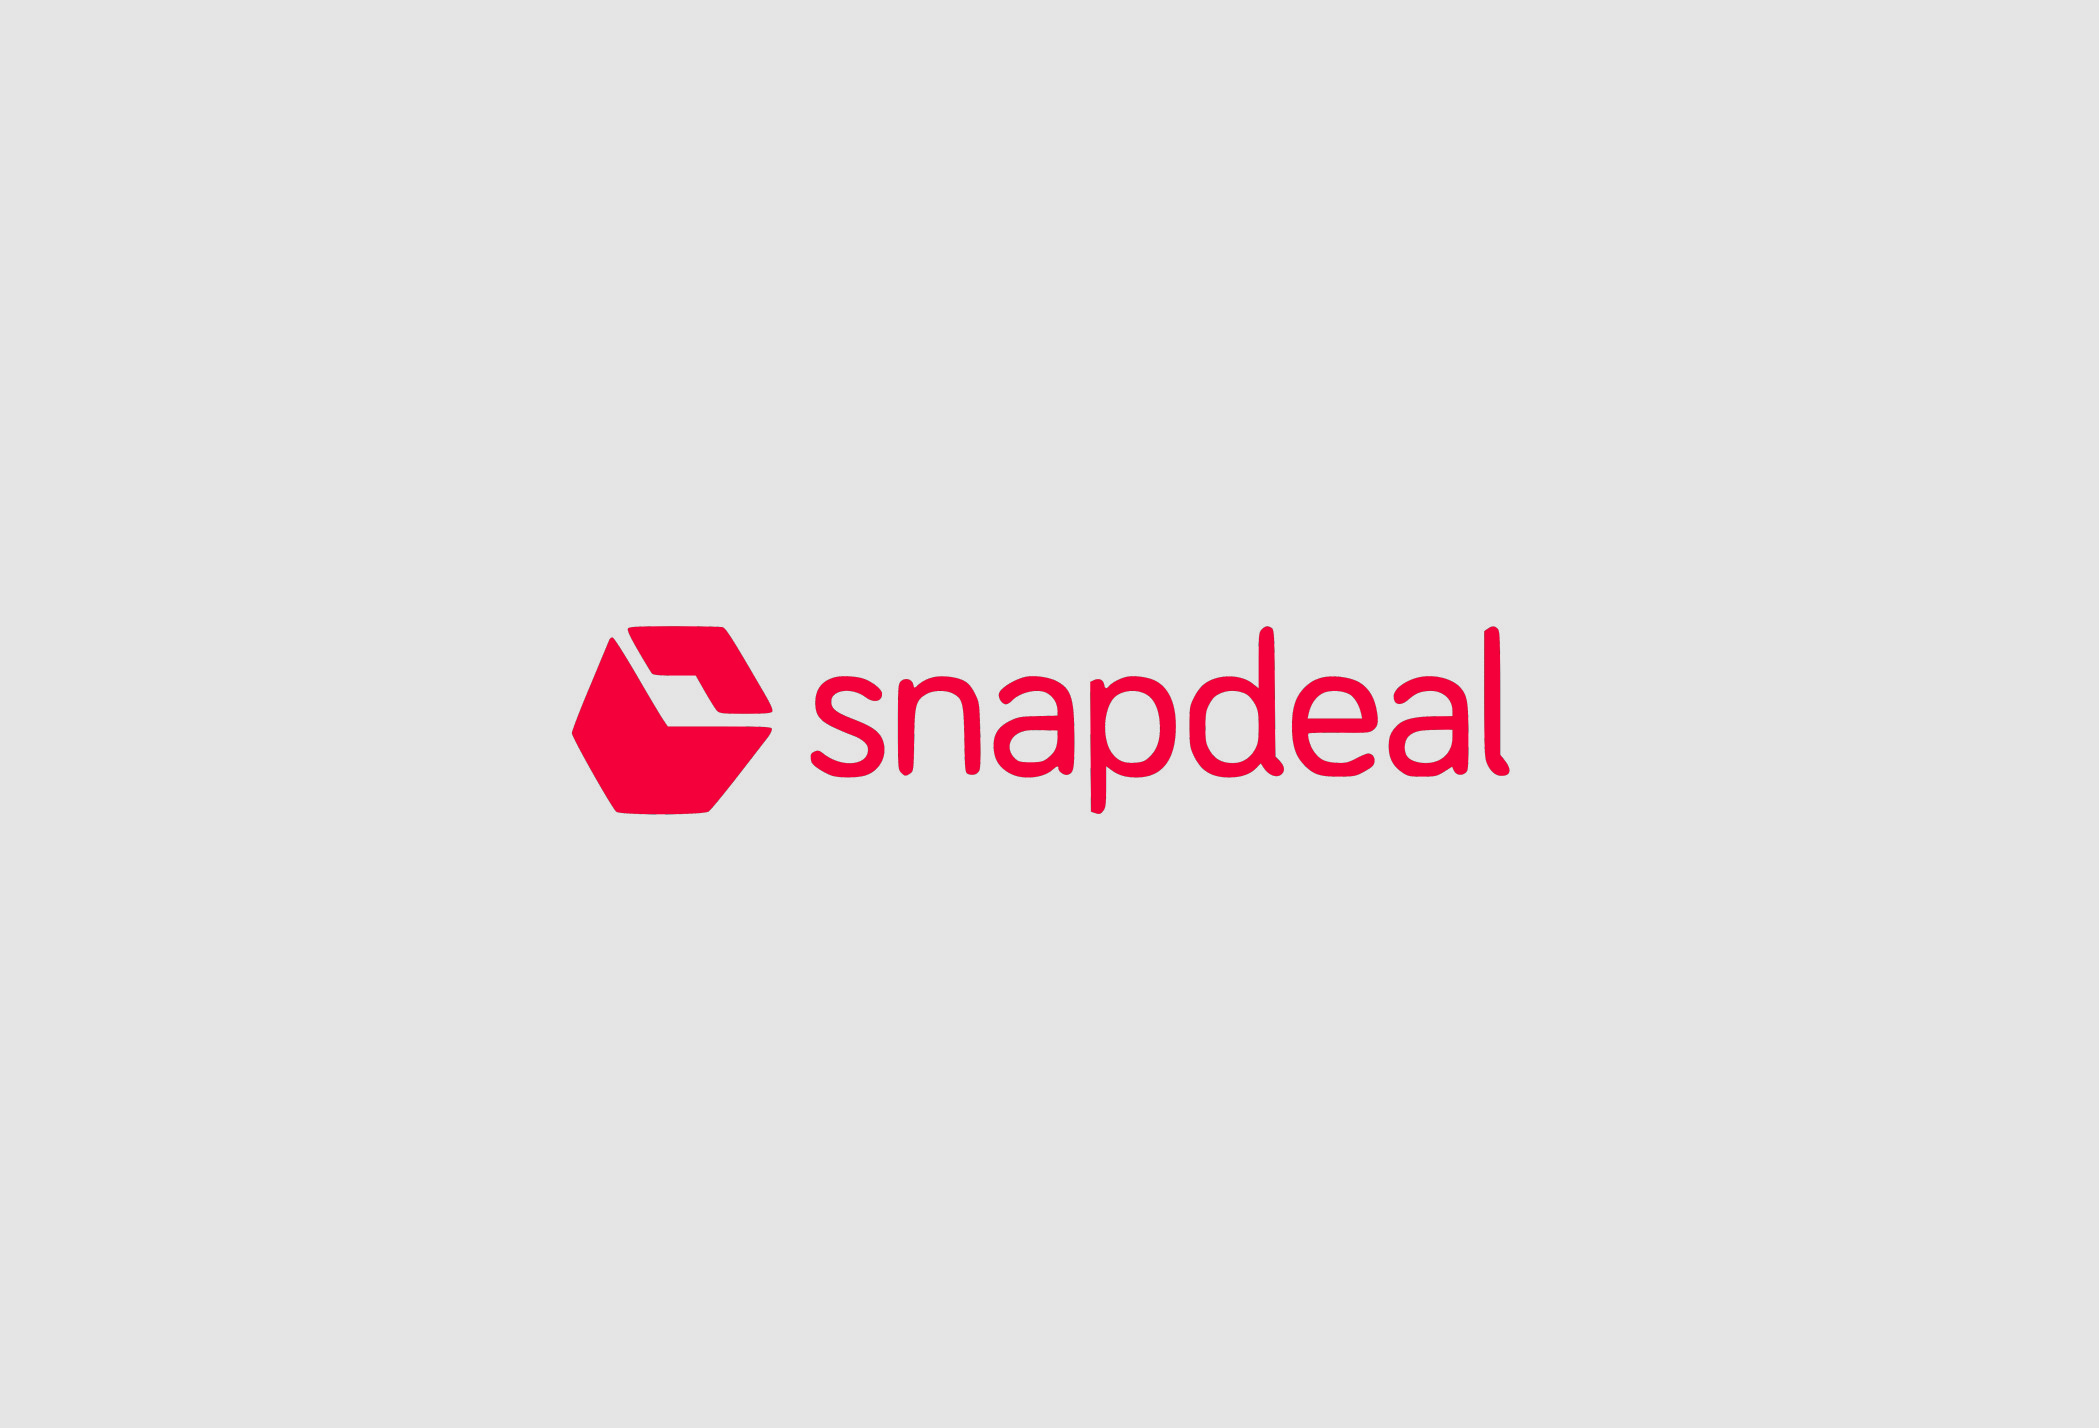 Snapdeal Logo